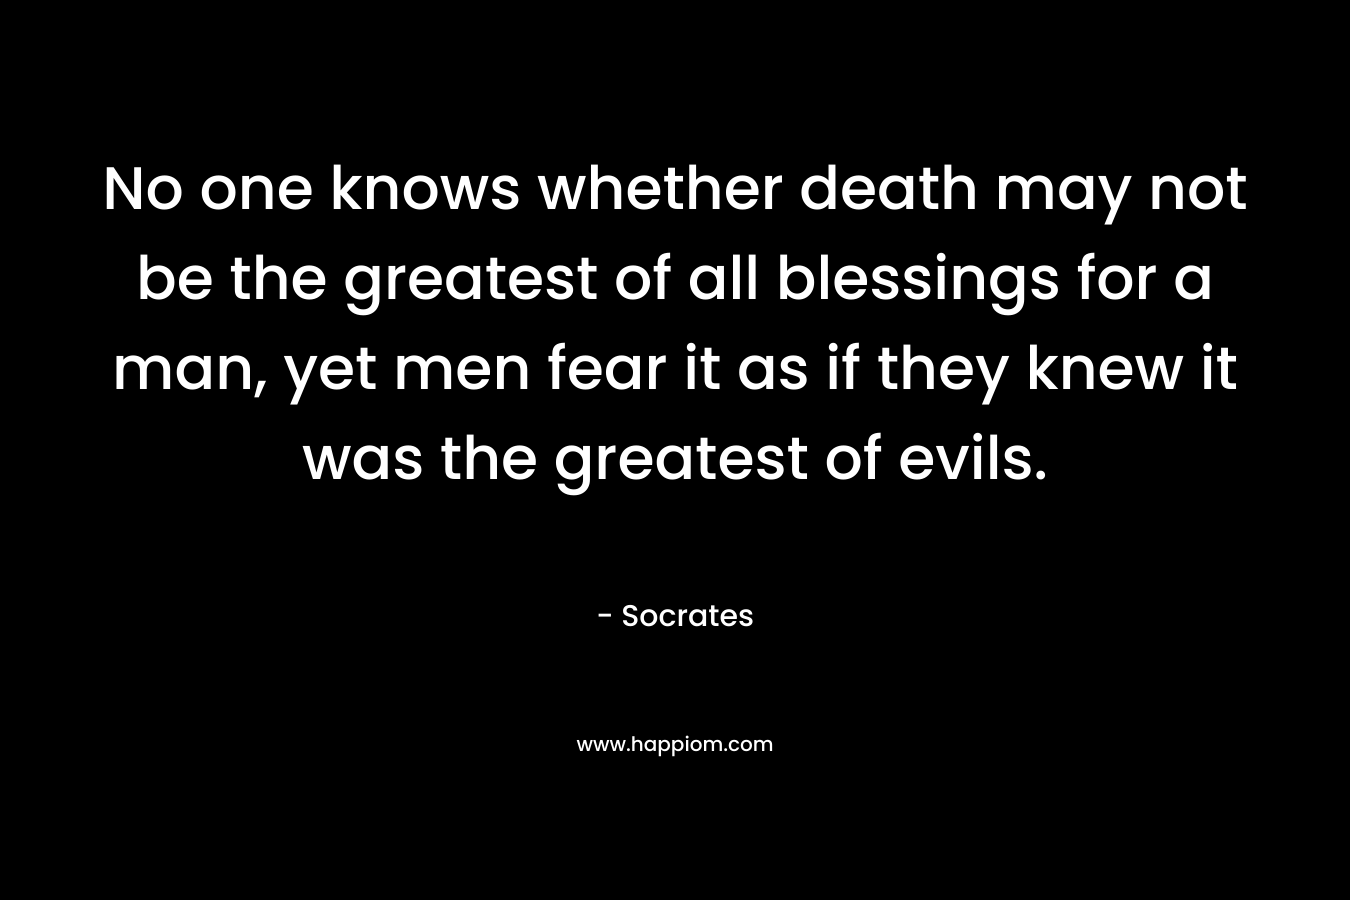 No one knows whether death may not be the greatest of all blessings for a man, yet men fear it as if they knew it was the greatest of evils. – Socrates